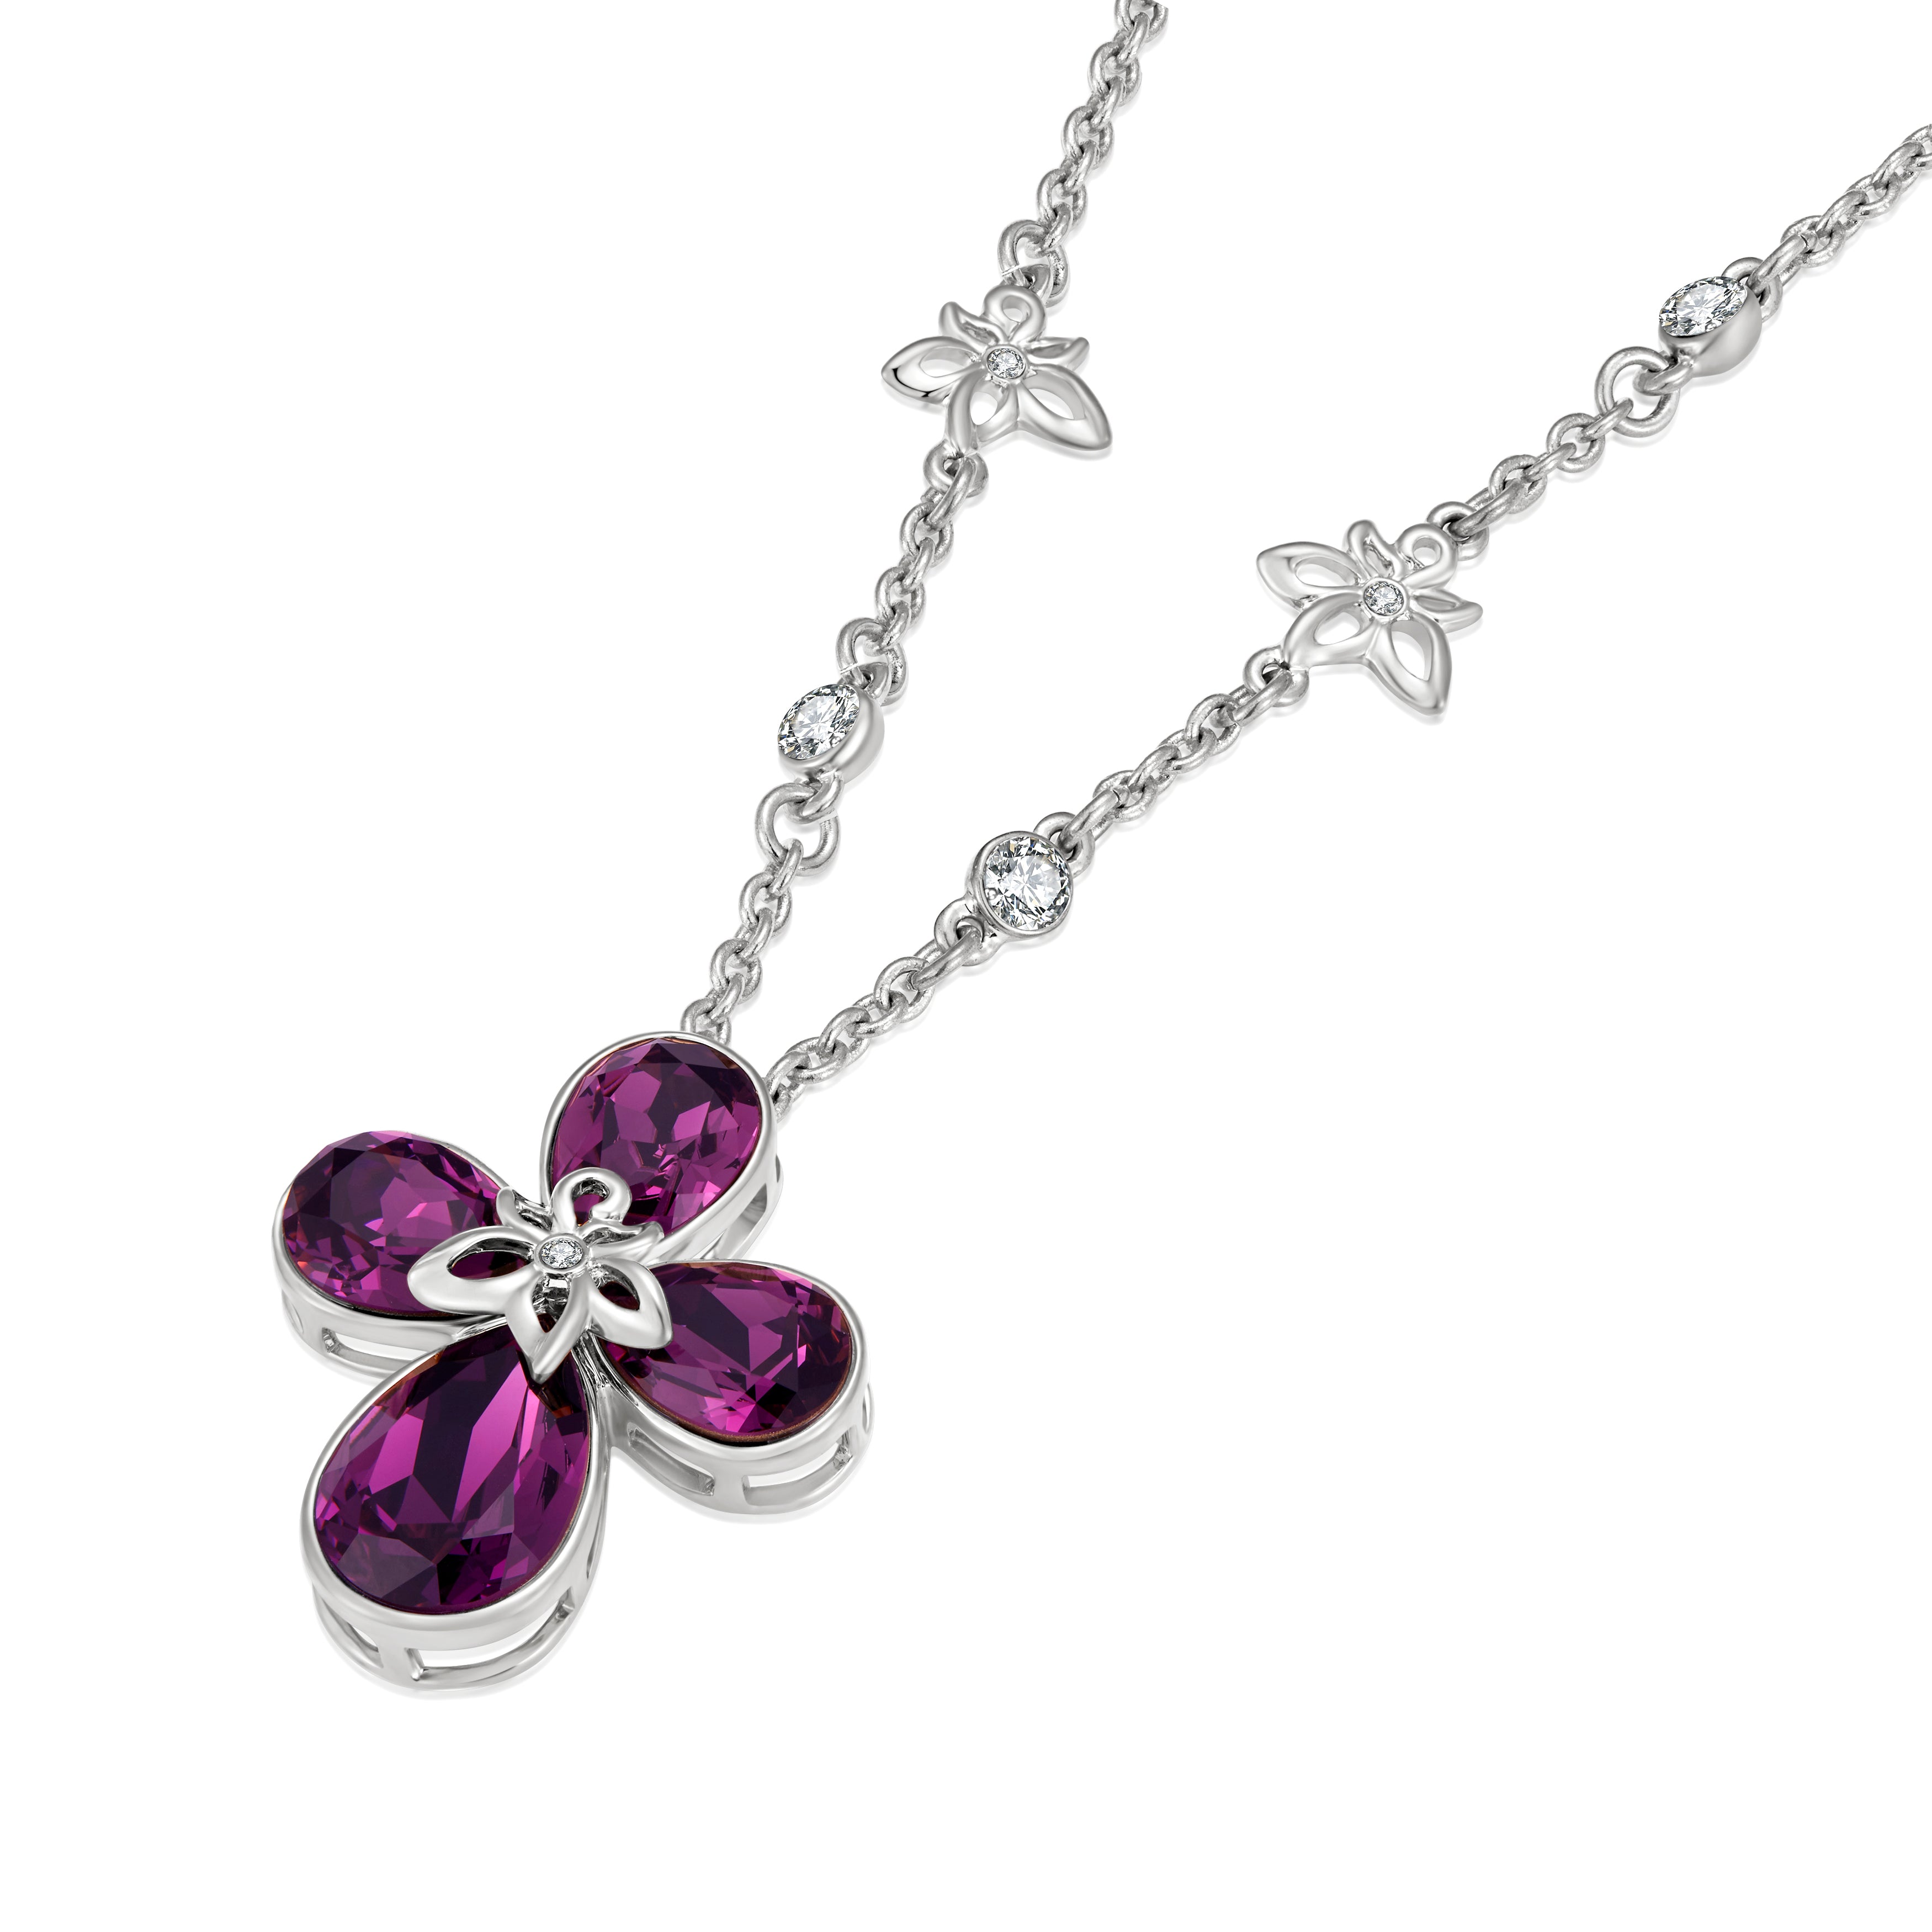 Crystal Lucky Four Leaf Clover Necklace and chain set with Genuine Loose  Swarovski Elements Crystals and